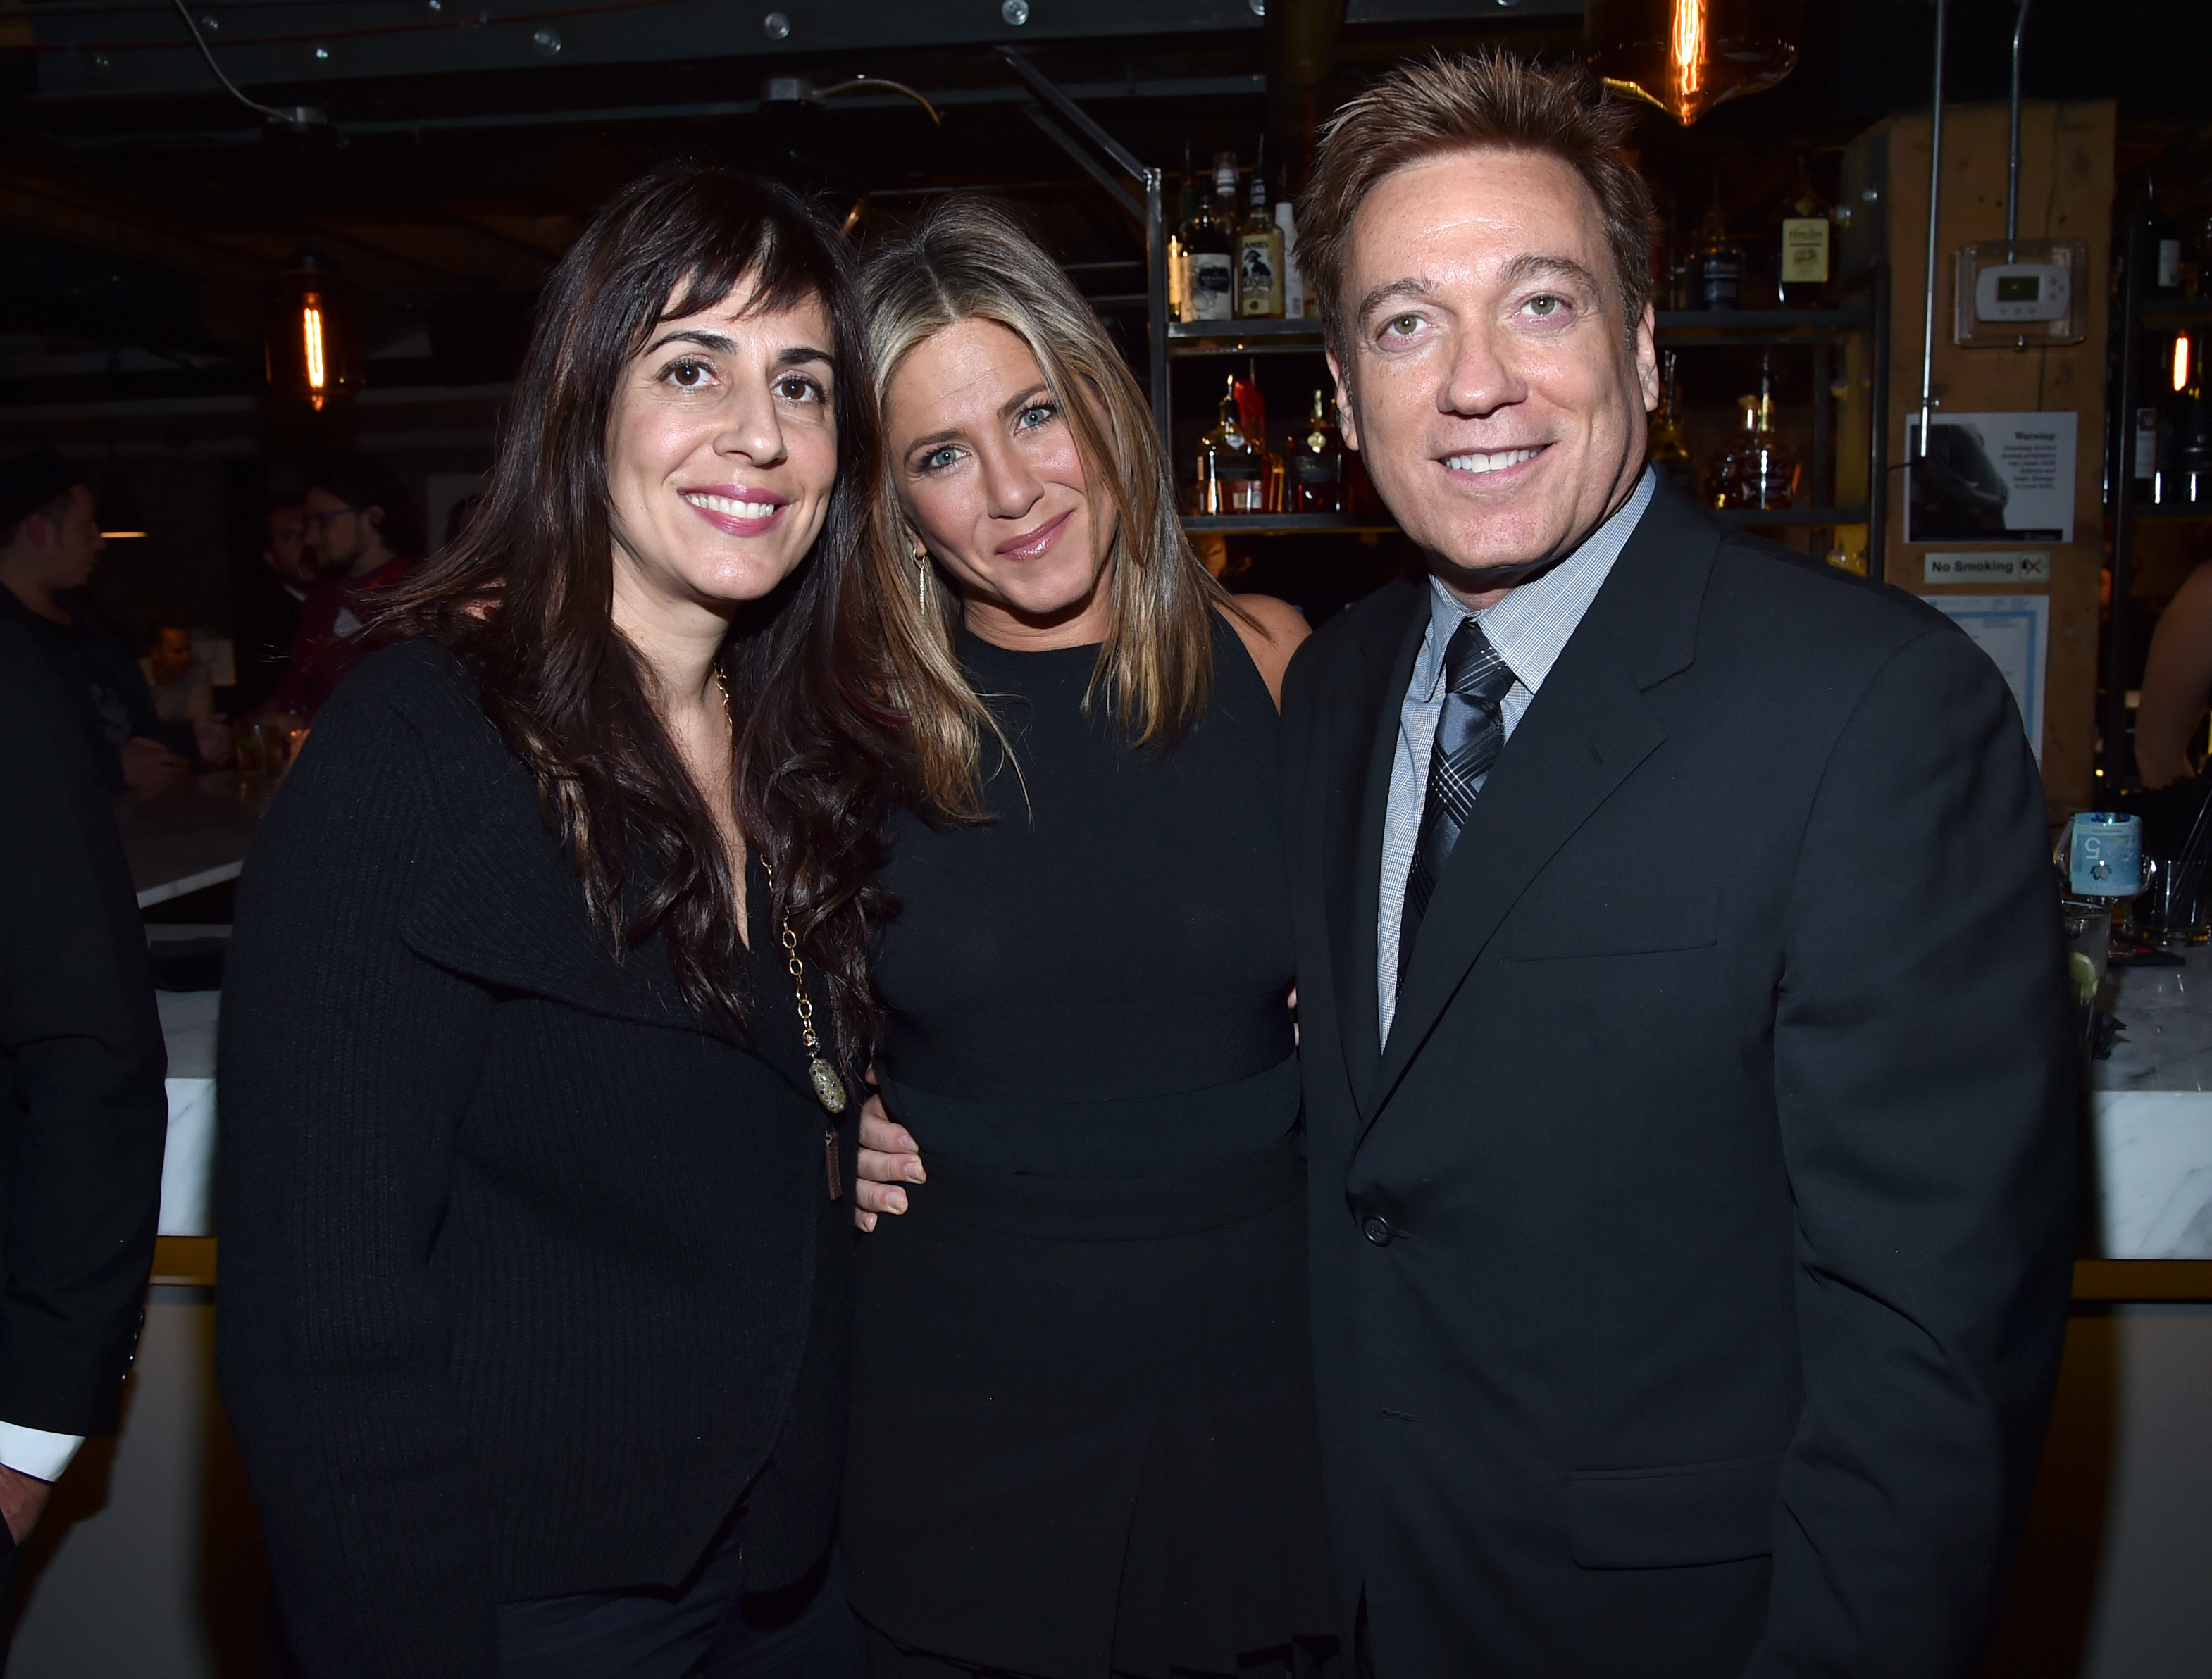 Aleen Keshishian, Jennifer Aniston, and Kevin Huvane at the "Cake" cocktail reception on September 8, 2014, in Toronto, Canada | Source: Getty Images